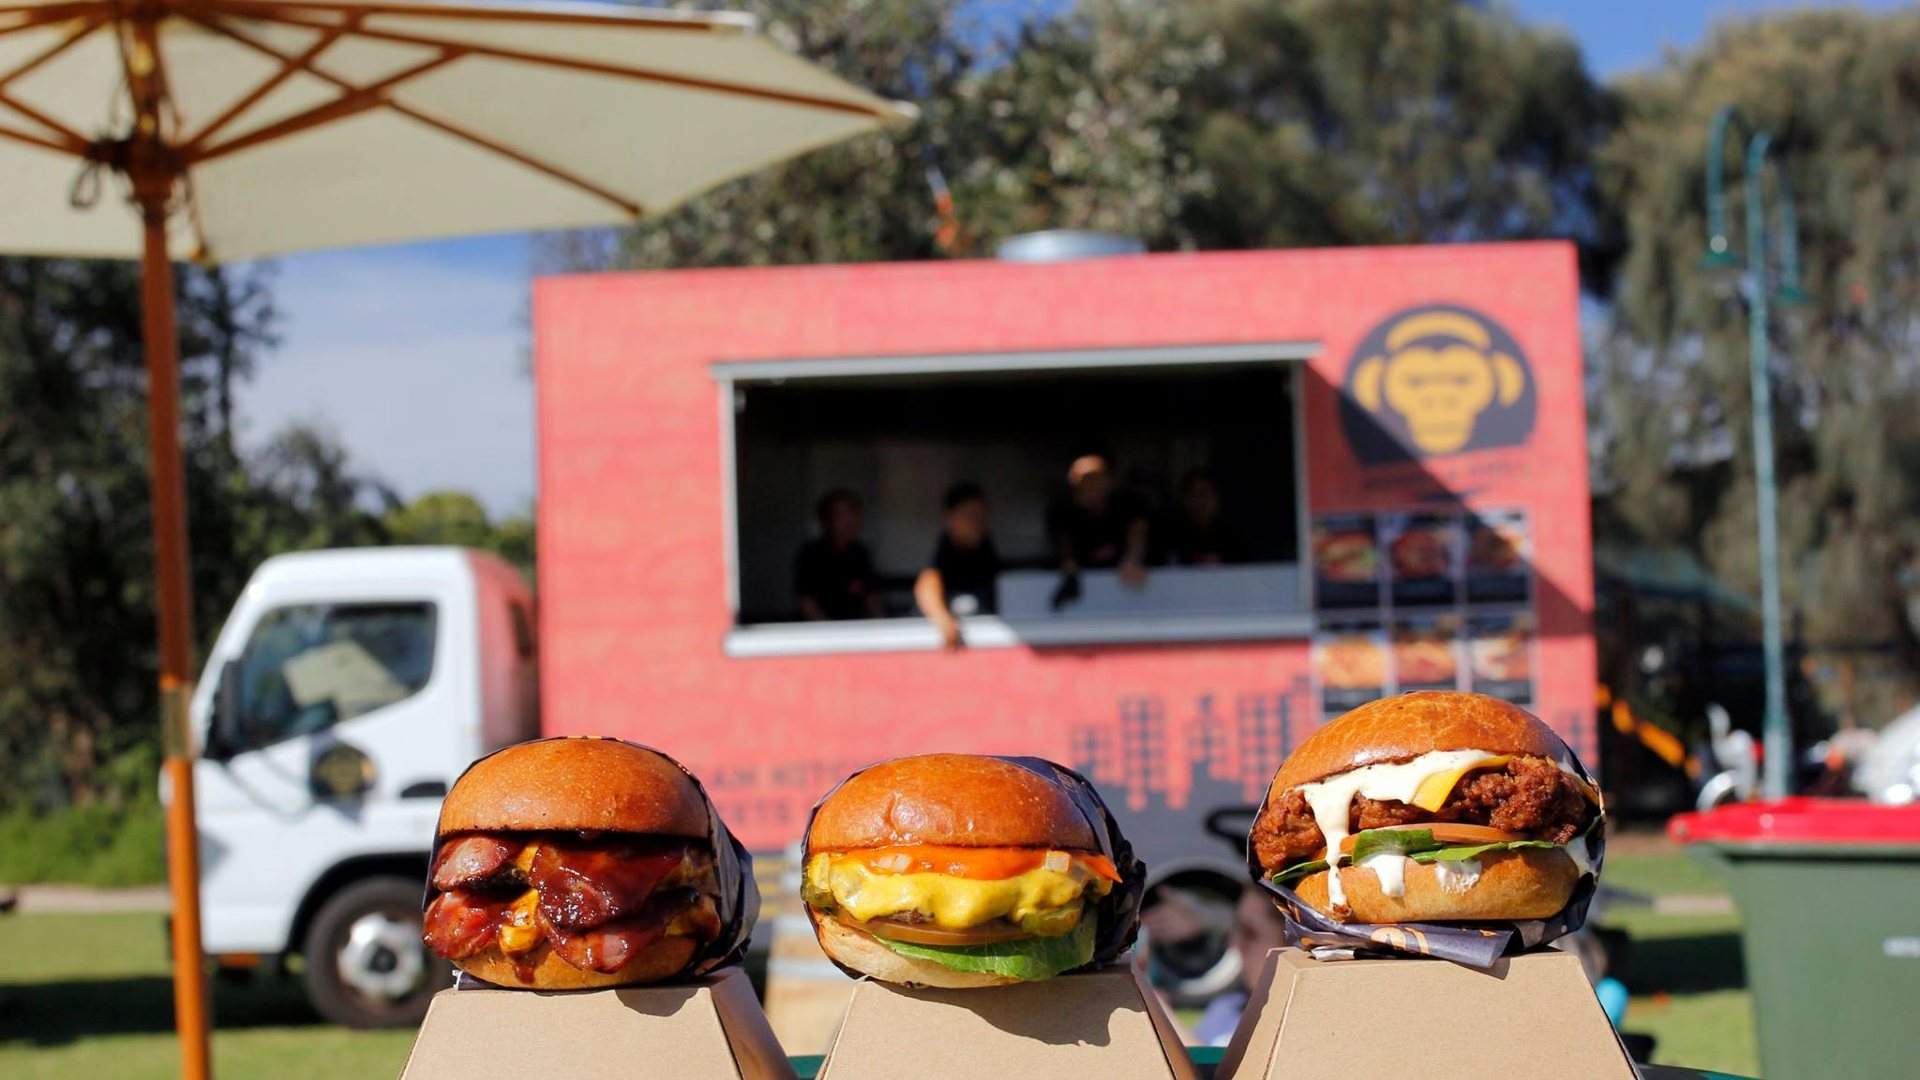 The Queen Victoria Market's Food Truck Stop Will Return for Another Summer Season